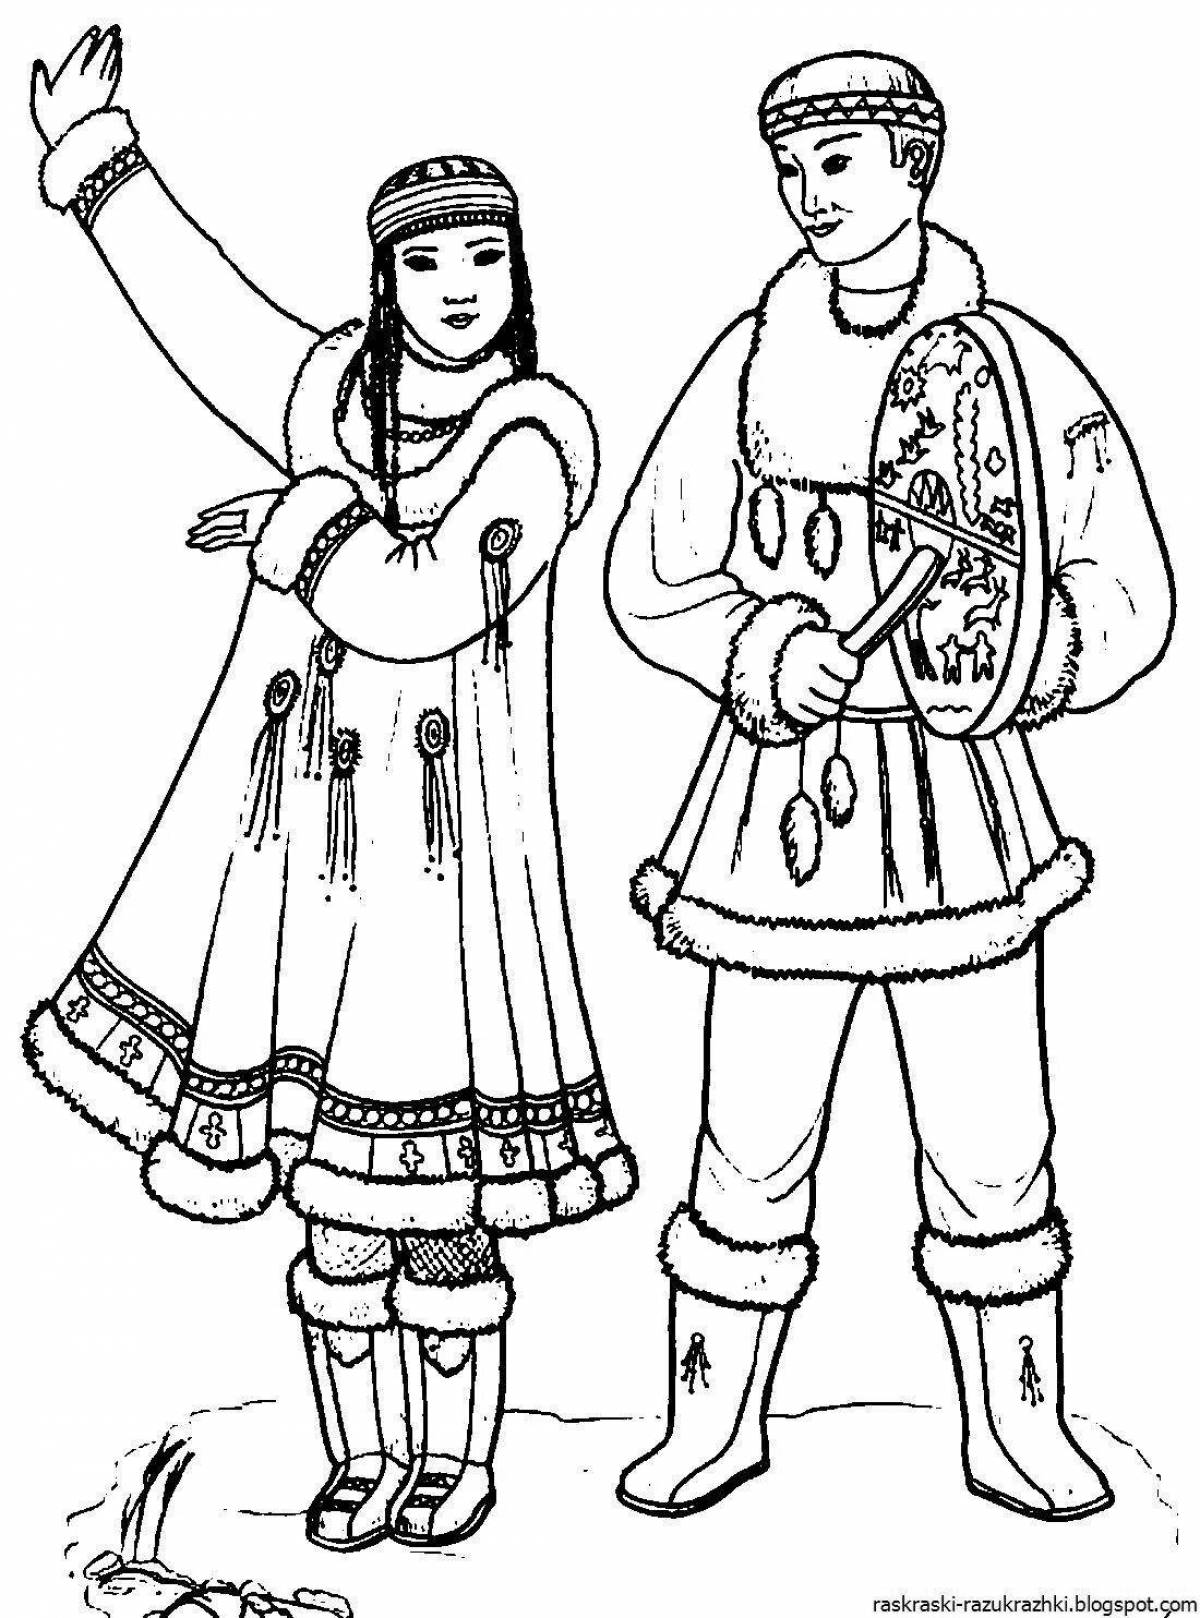 Delightful Chukchi coloring book for kids